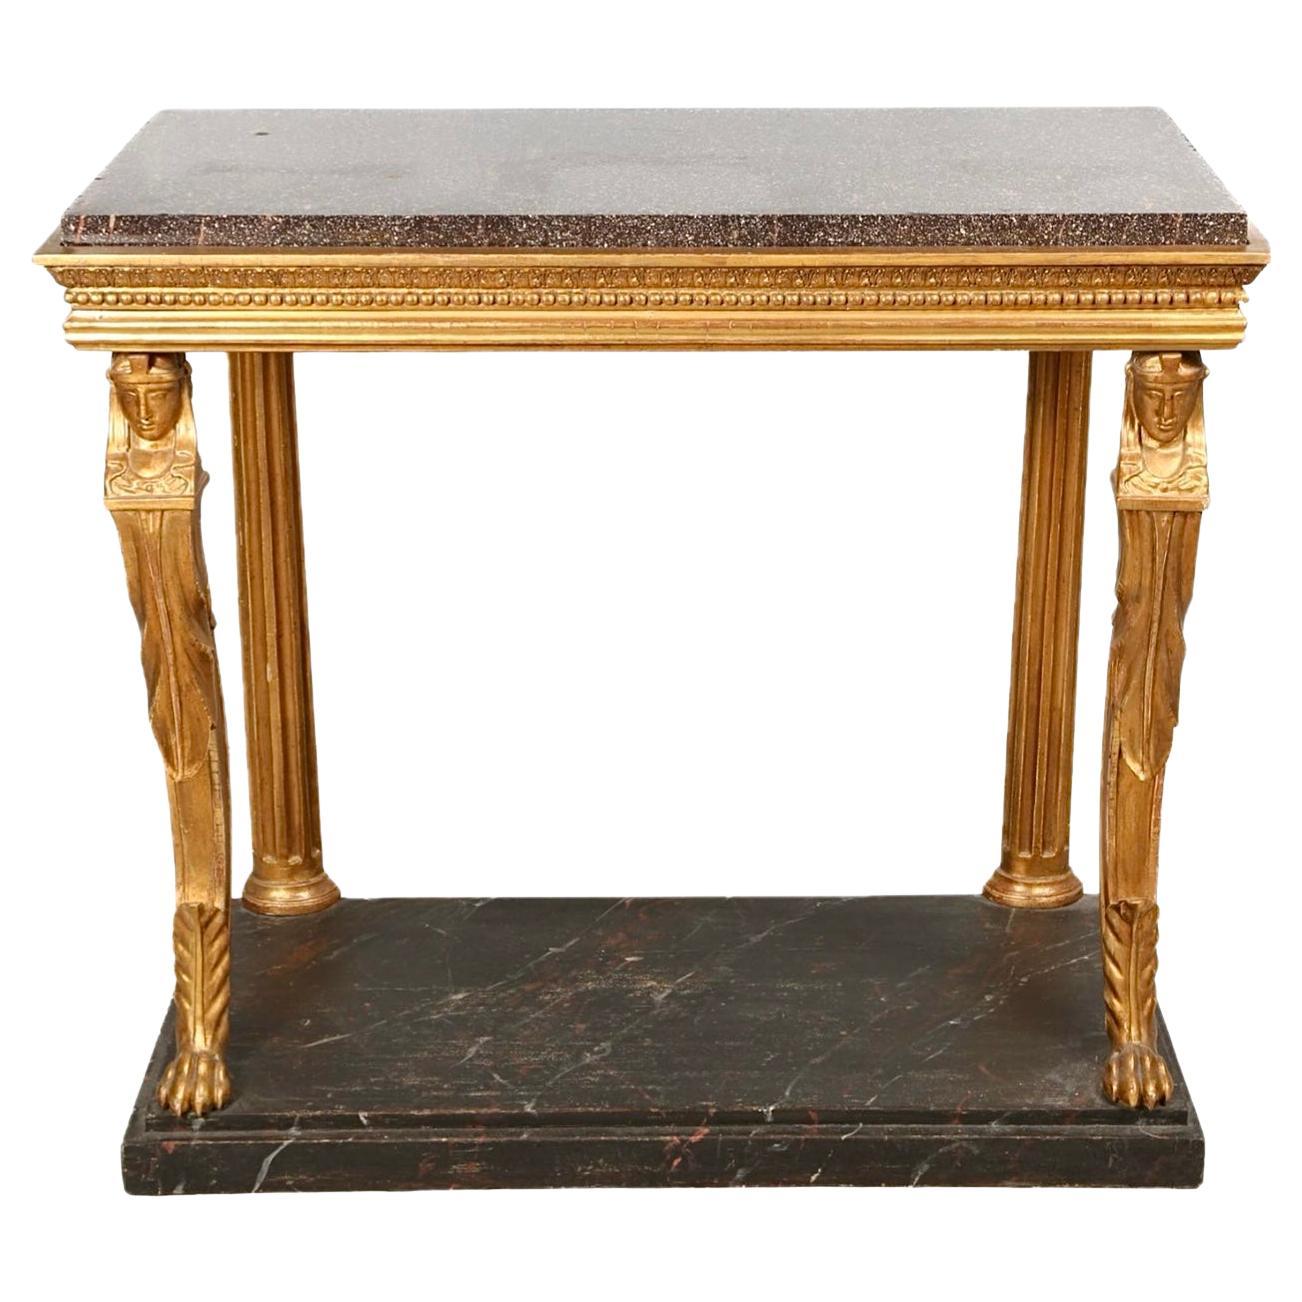 Swedish Neoclassical Giltwood Porphyry Top Console Table, Early 19th Century